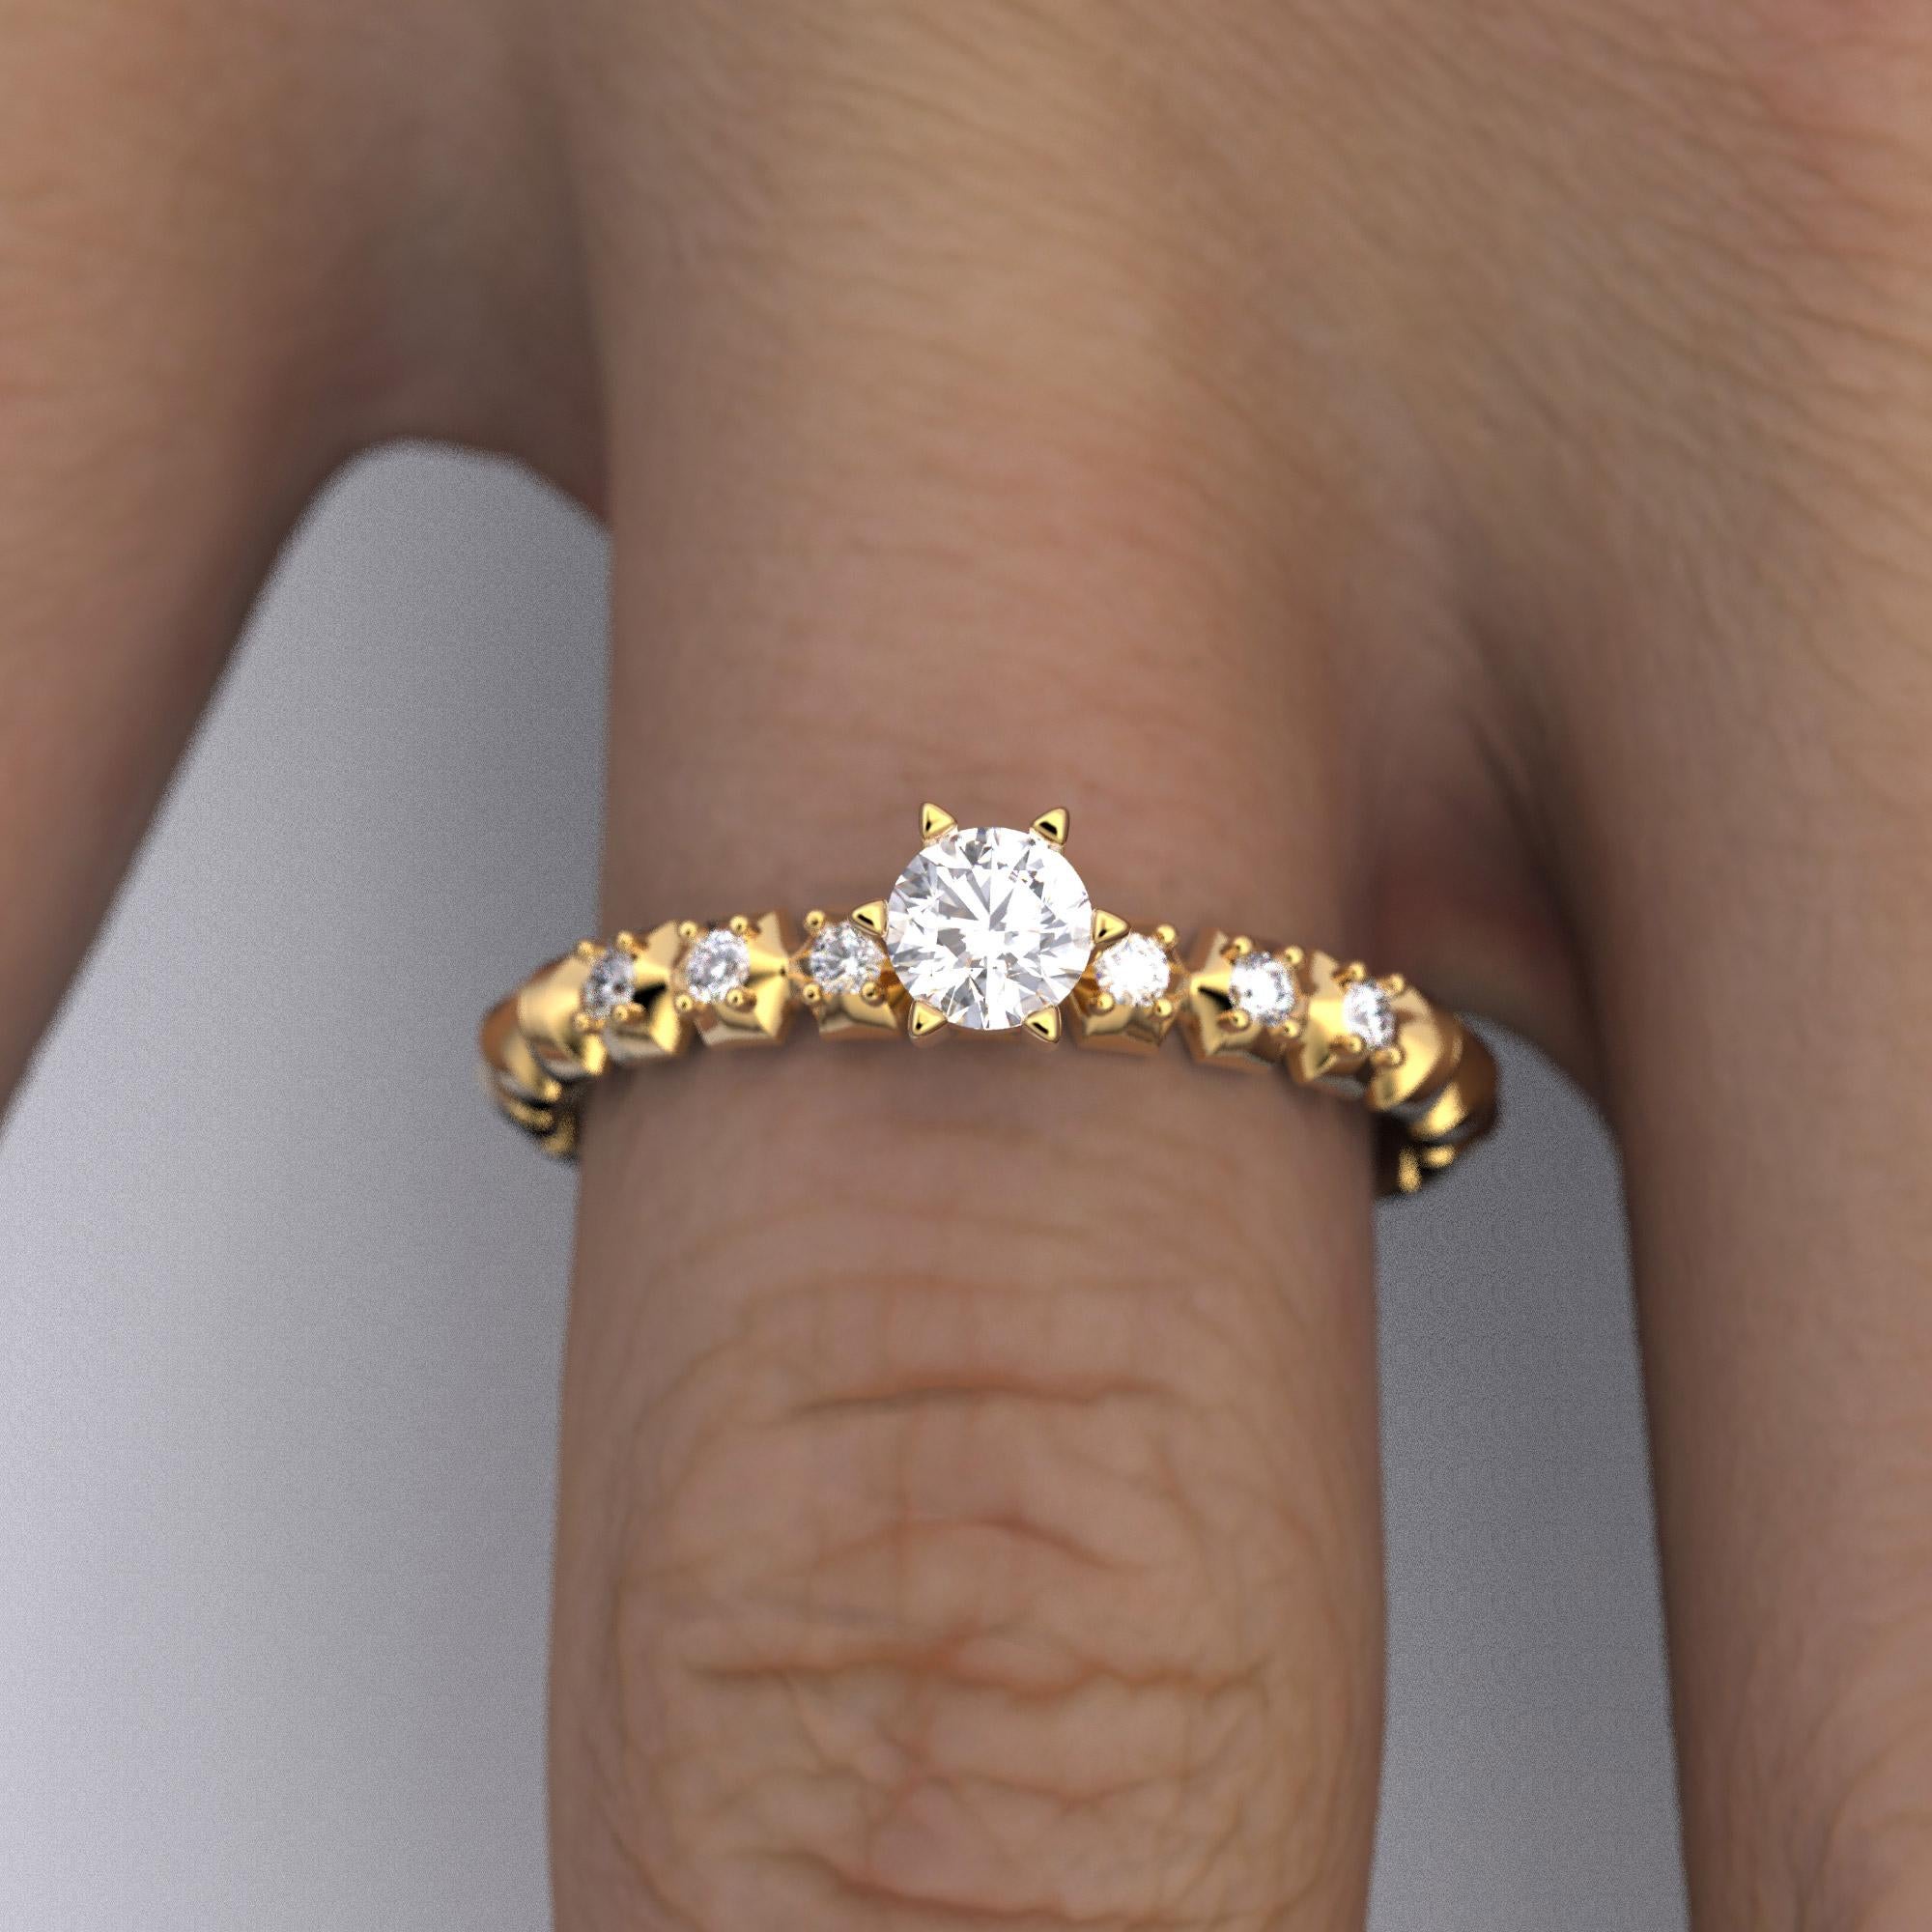 For Sale:  Italian-Made 0.32 Carat Diamond Engagement Ring in 14k Solid Gold 11